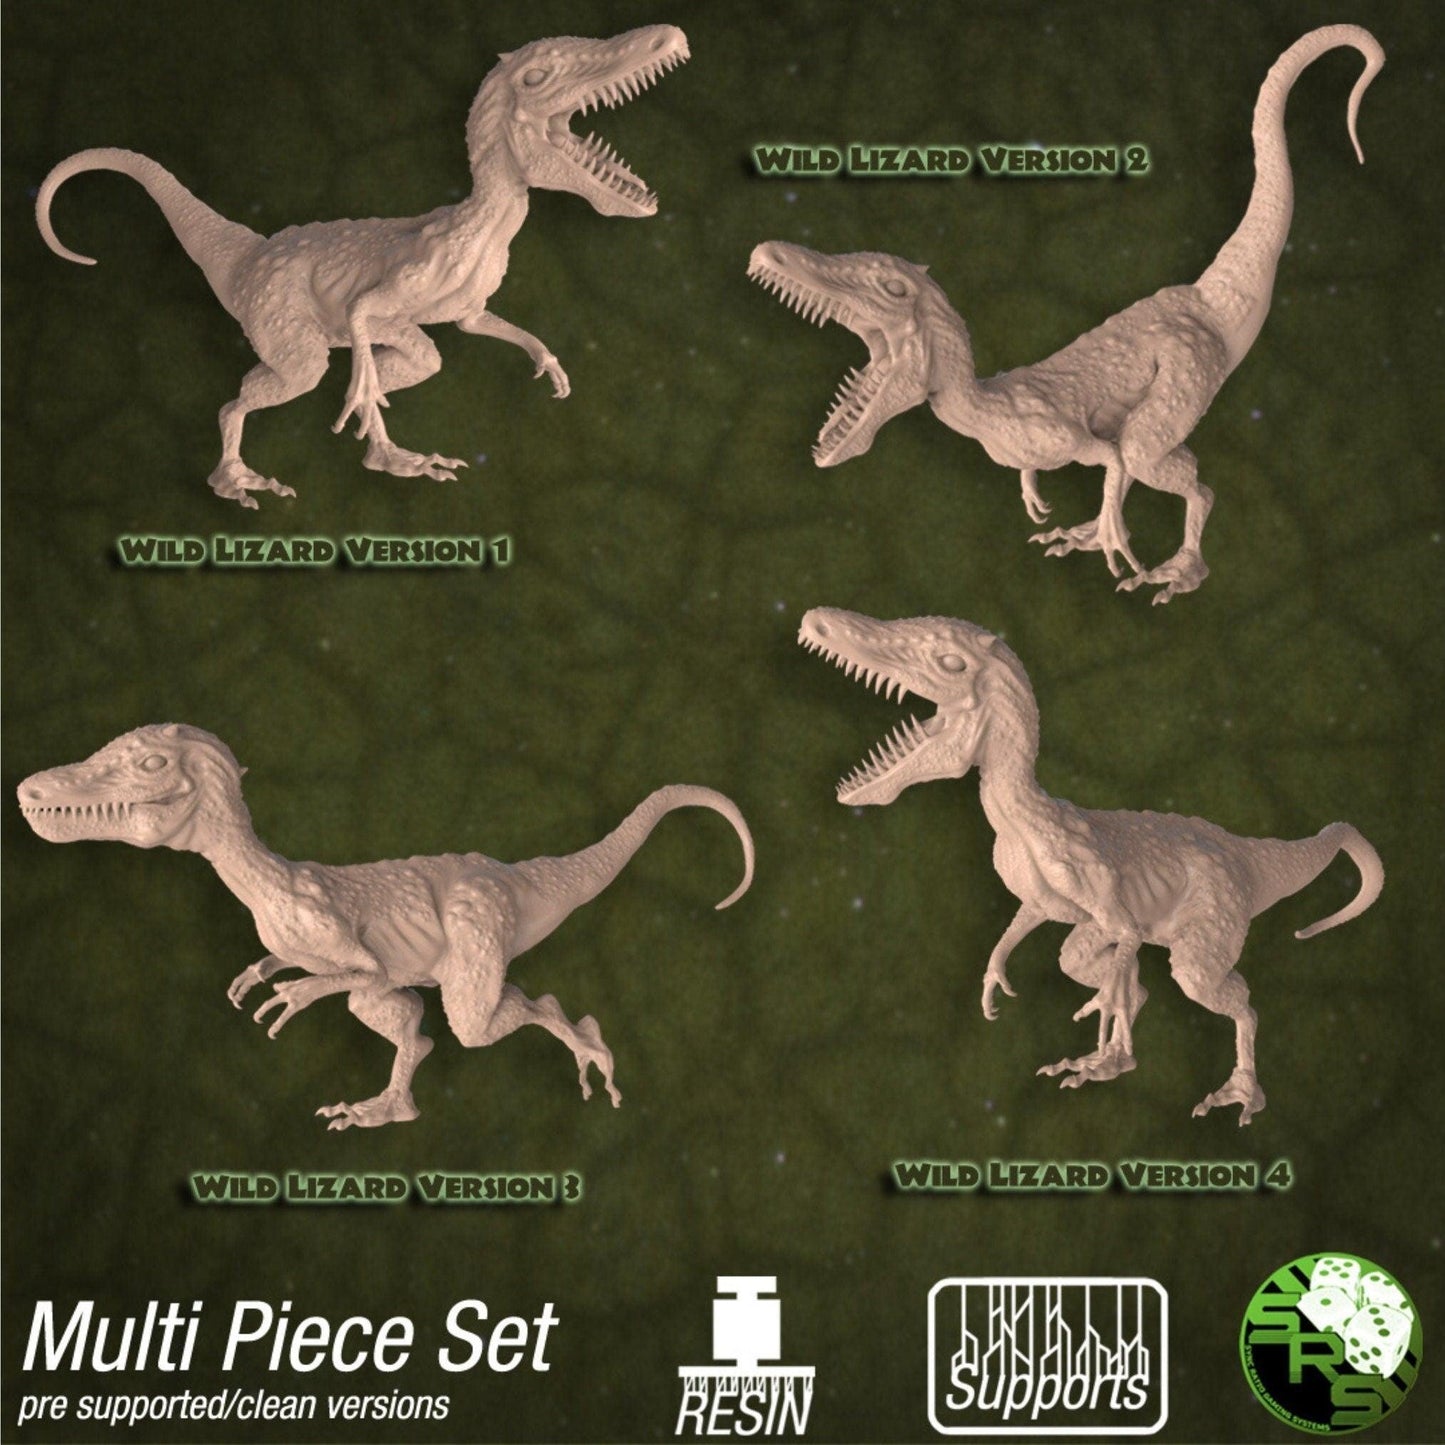 DnD Wild Lizard - 25mm base | 32mm scale | Tabletop gaming DnD Miniature Dungeons and Dragons,dnd monster manual - Plague Miniatures shop for DnD Miniatures